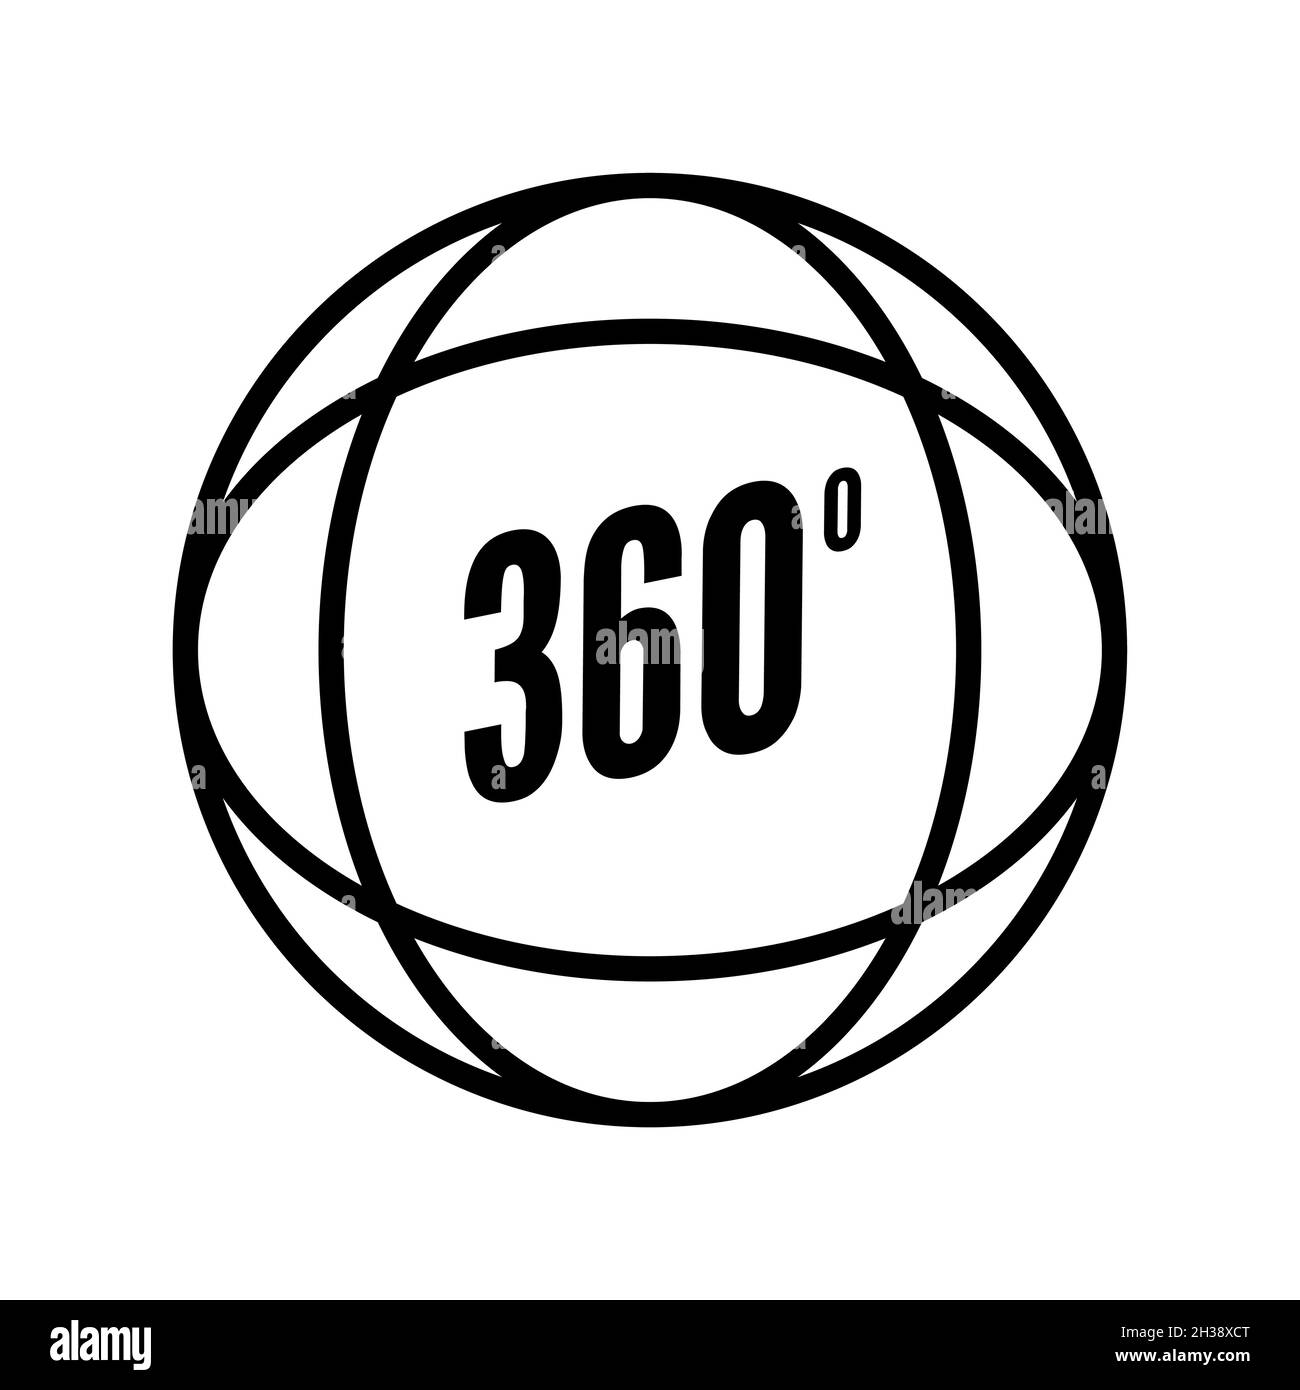 360 degree icon view vector circle pictogram. Rotate 360 degree view logo symbol 3d Stock Vector